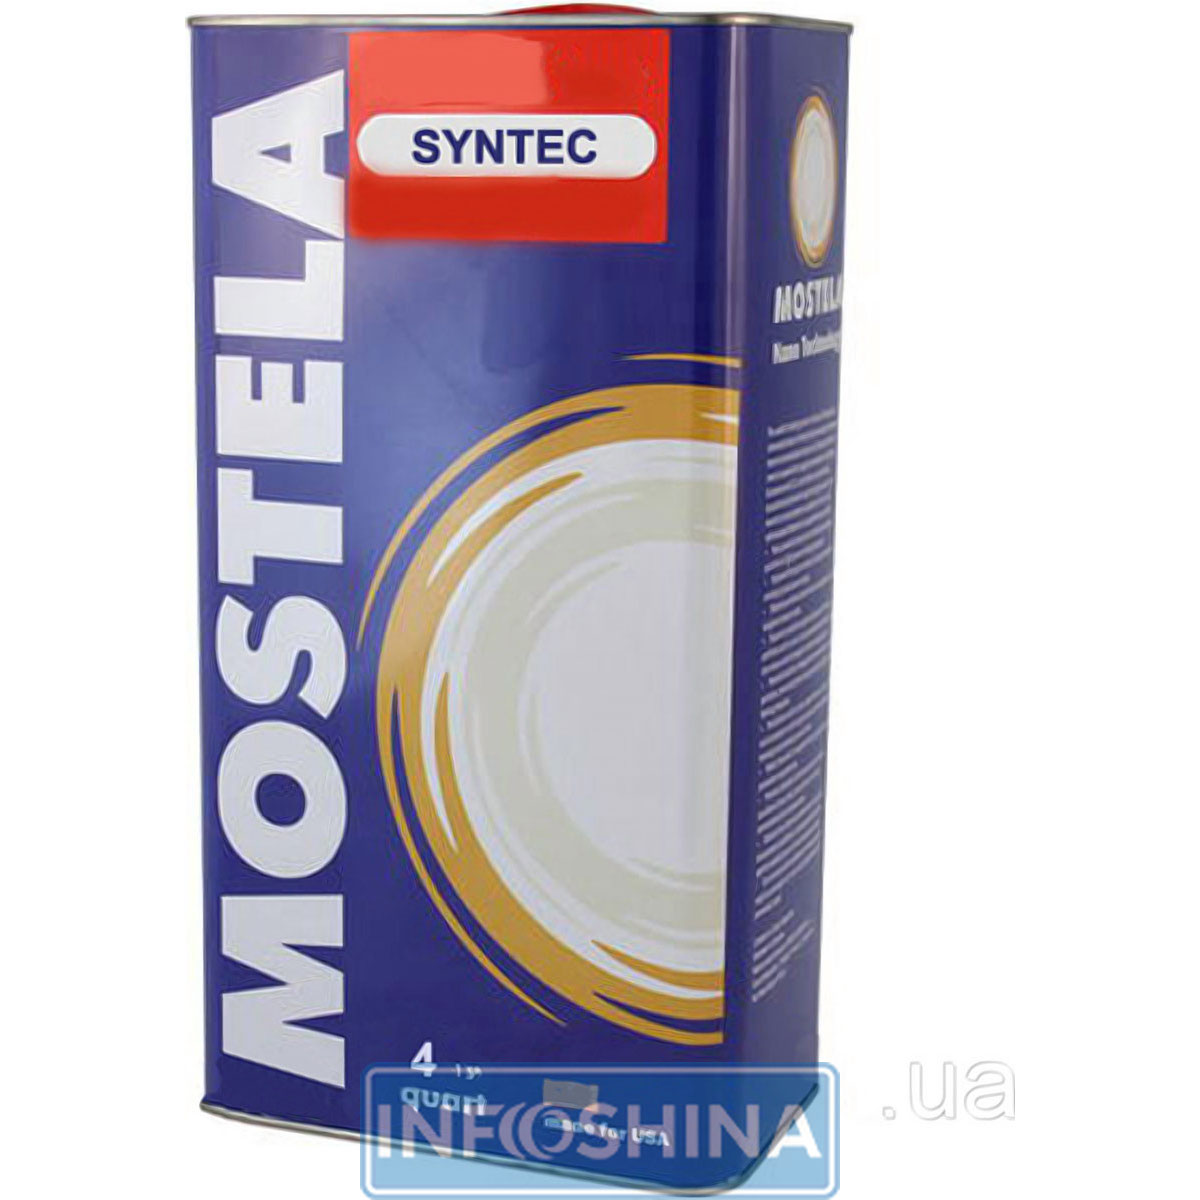 Mostela 5W-30 Synthetic SN/CF